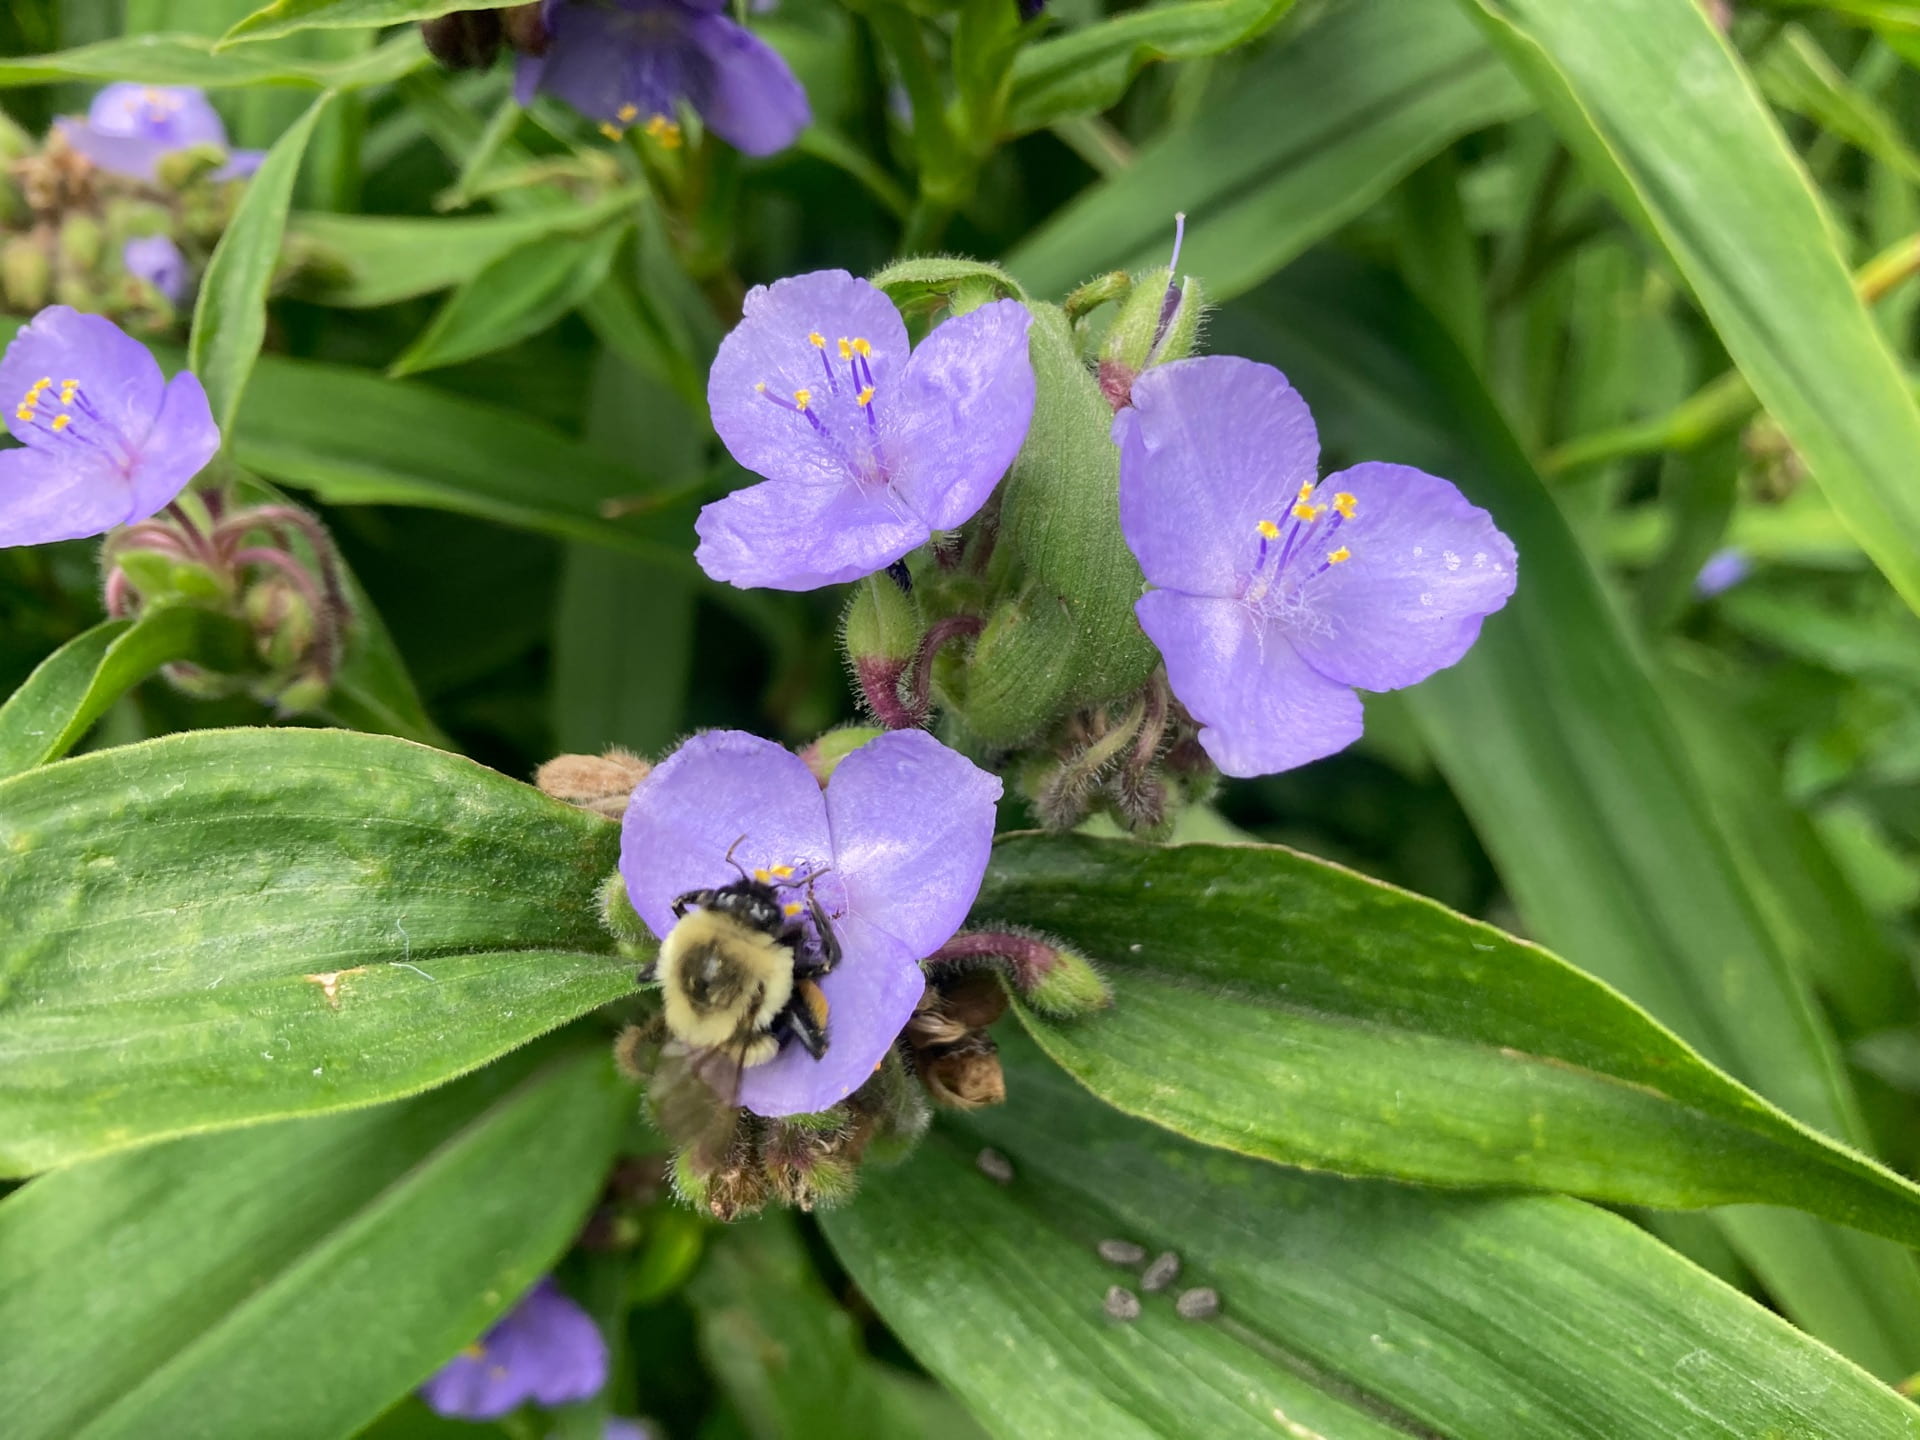 The long blooming flowers of Tradescantia virginiana attract pollinators through the summer.